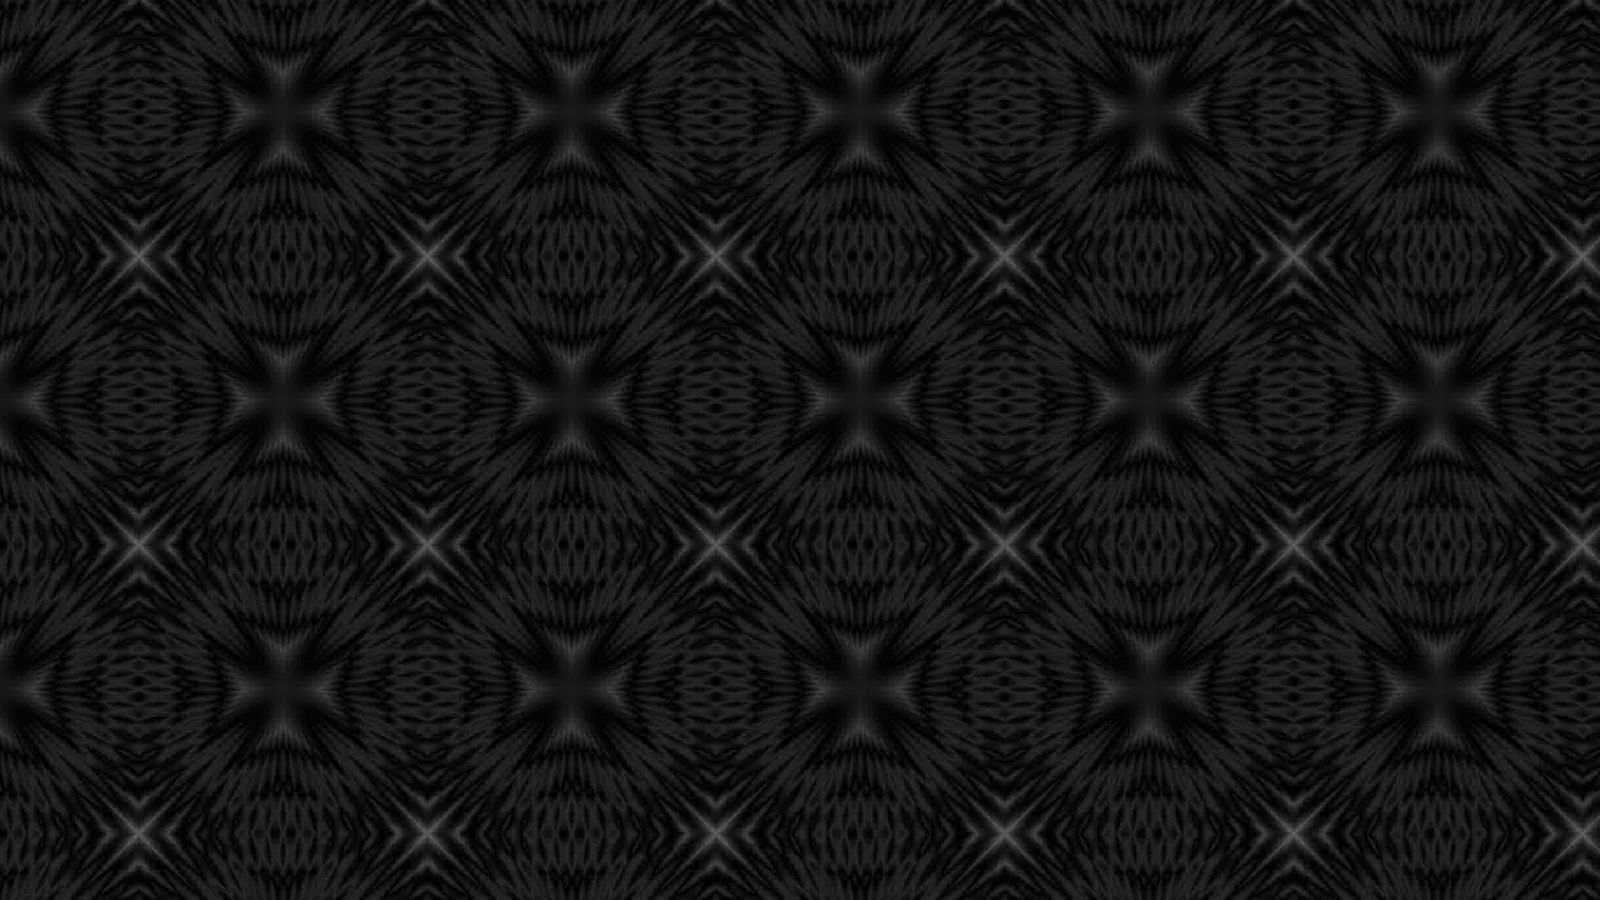 Download wallpaper 1600x900 black and white, abstract, black background  widescreen 16:9 hd background